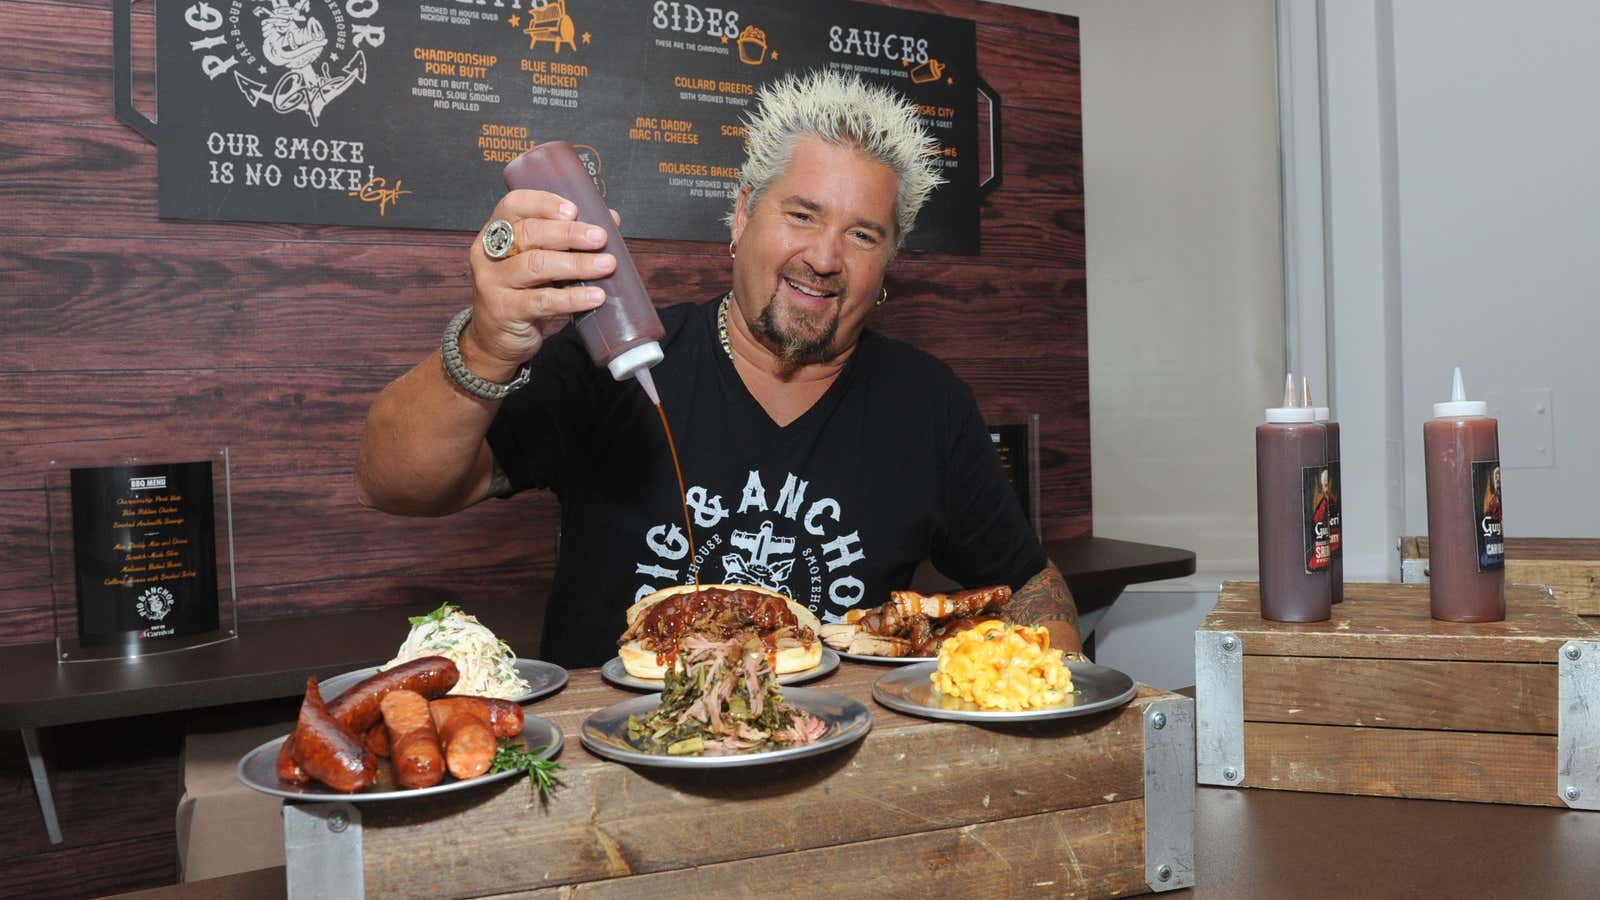 Guy Fieri’s Food Network home has a new hub, along with its sister brands.